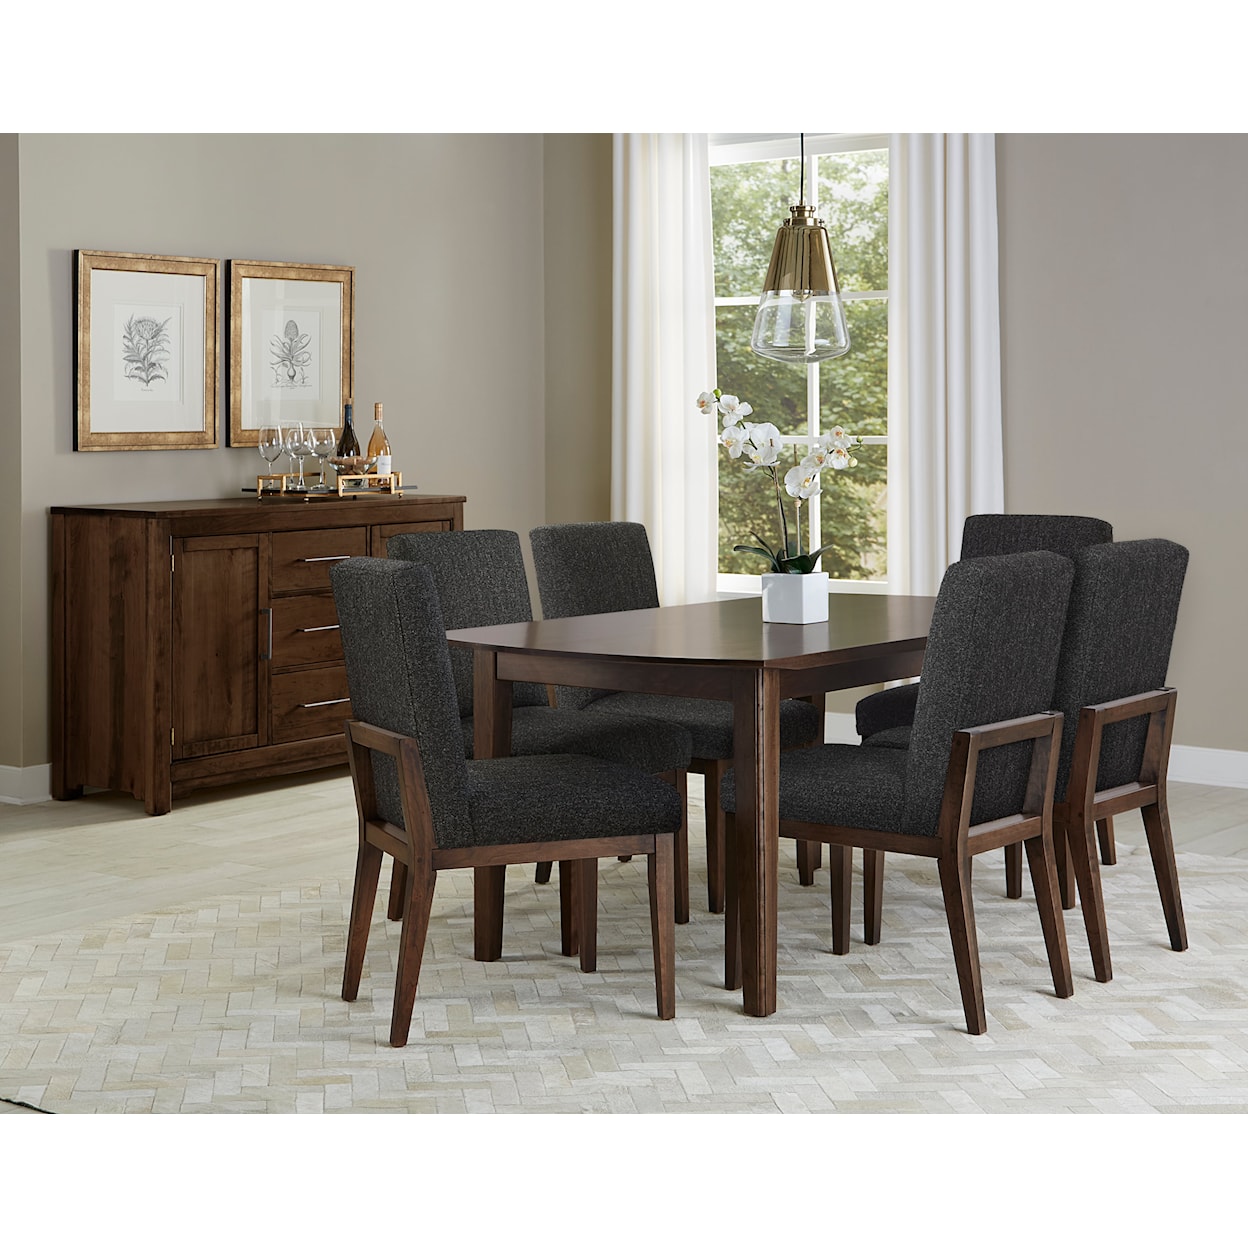 Virginia House Crafted Cherry - Dark Upholstered Side Dining Chair